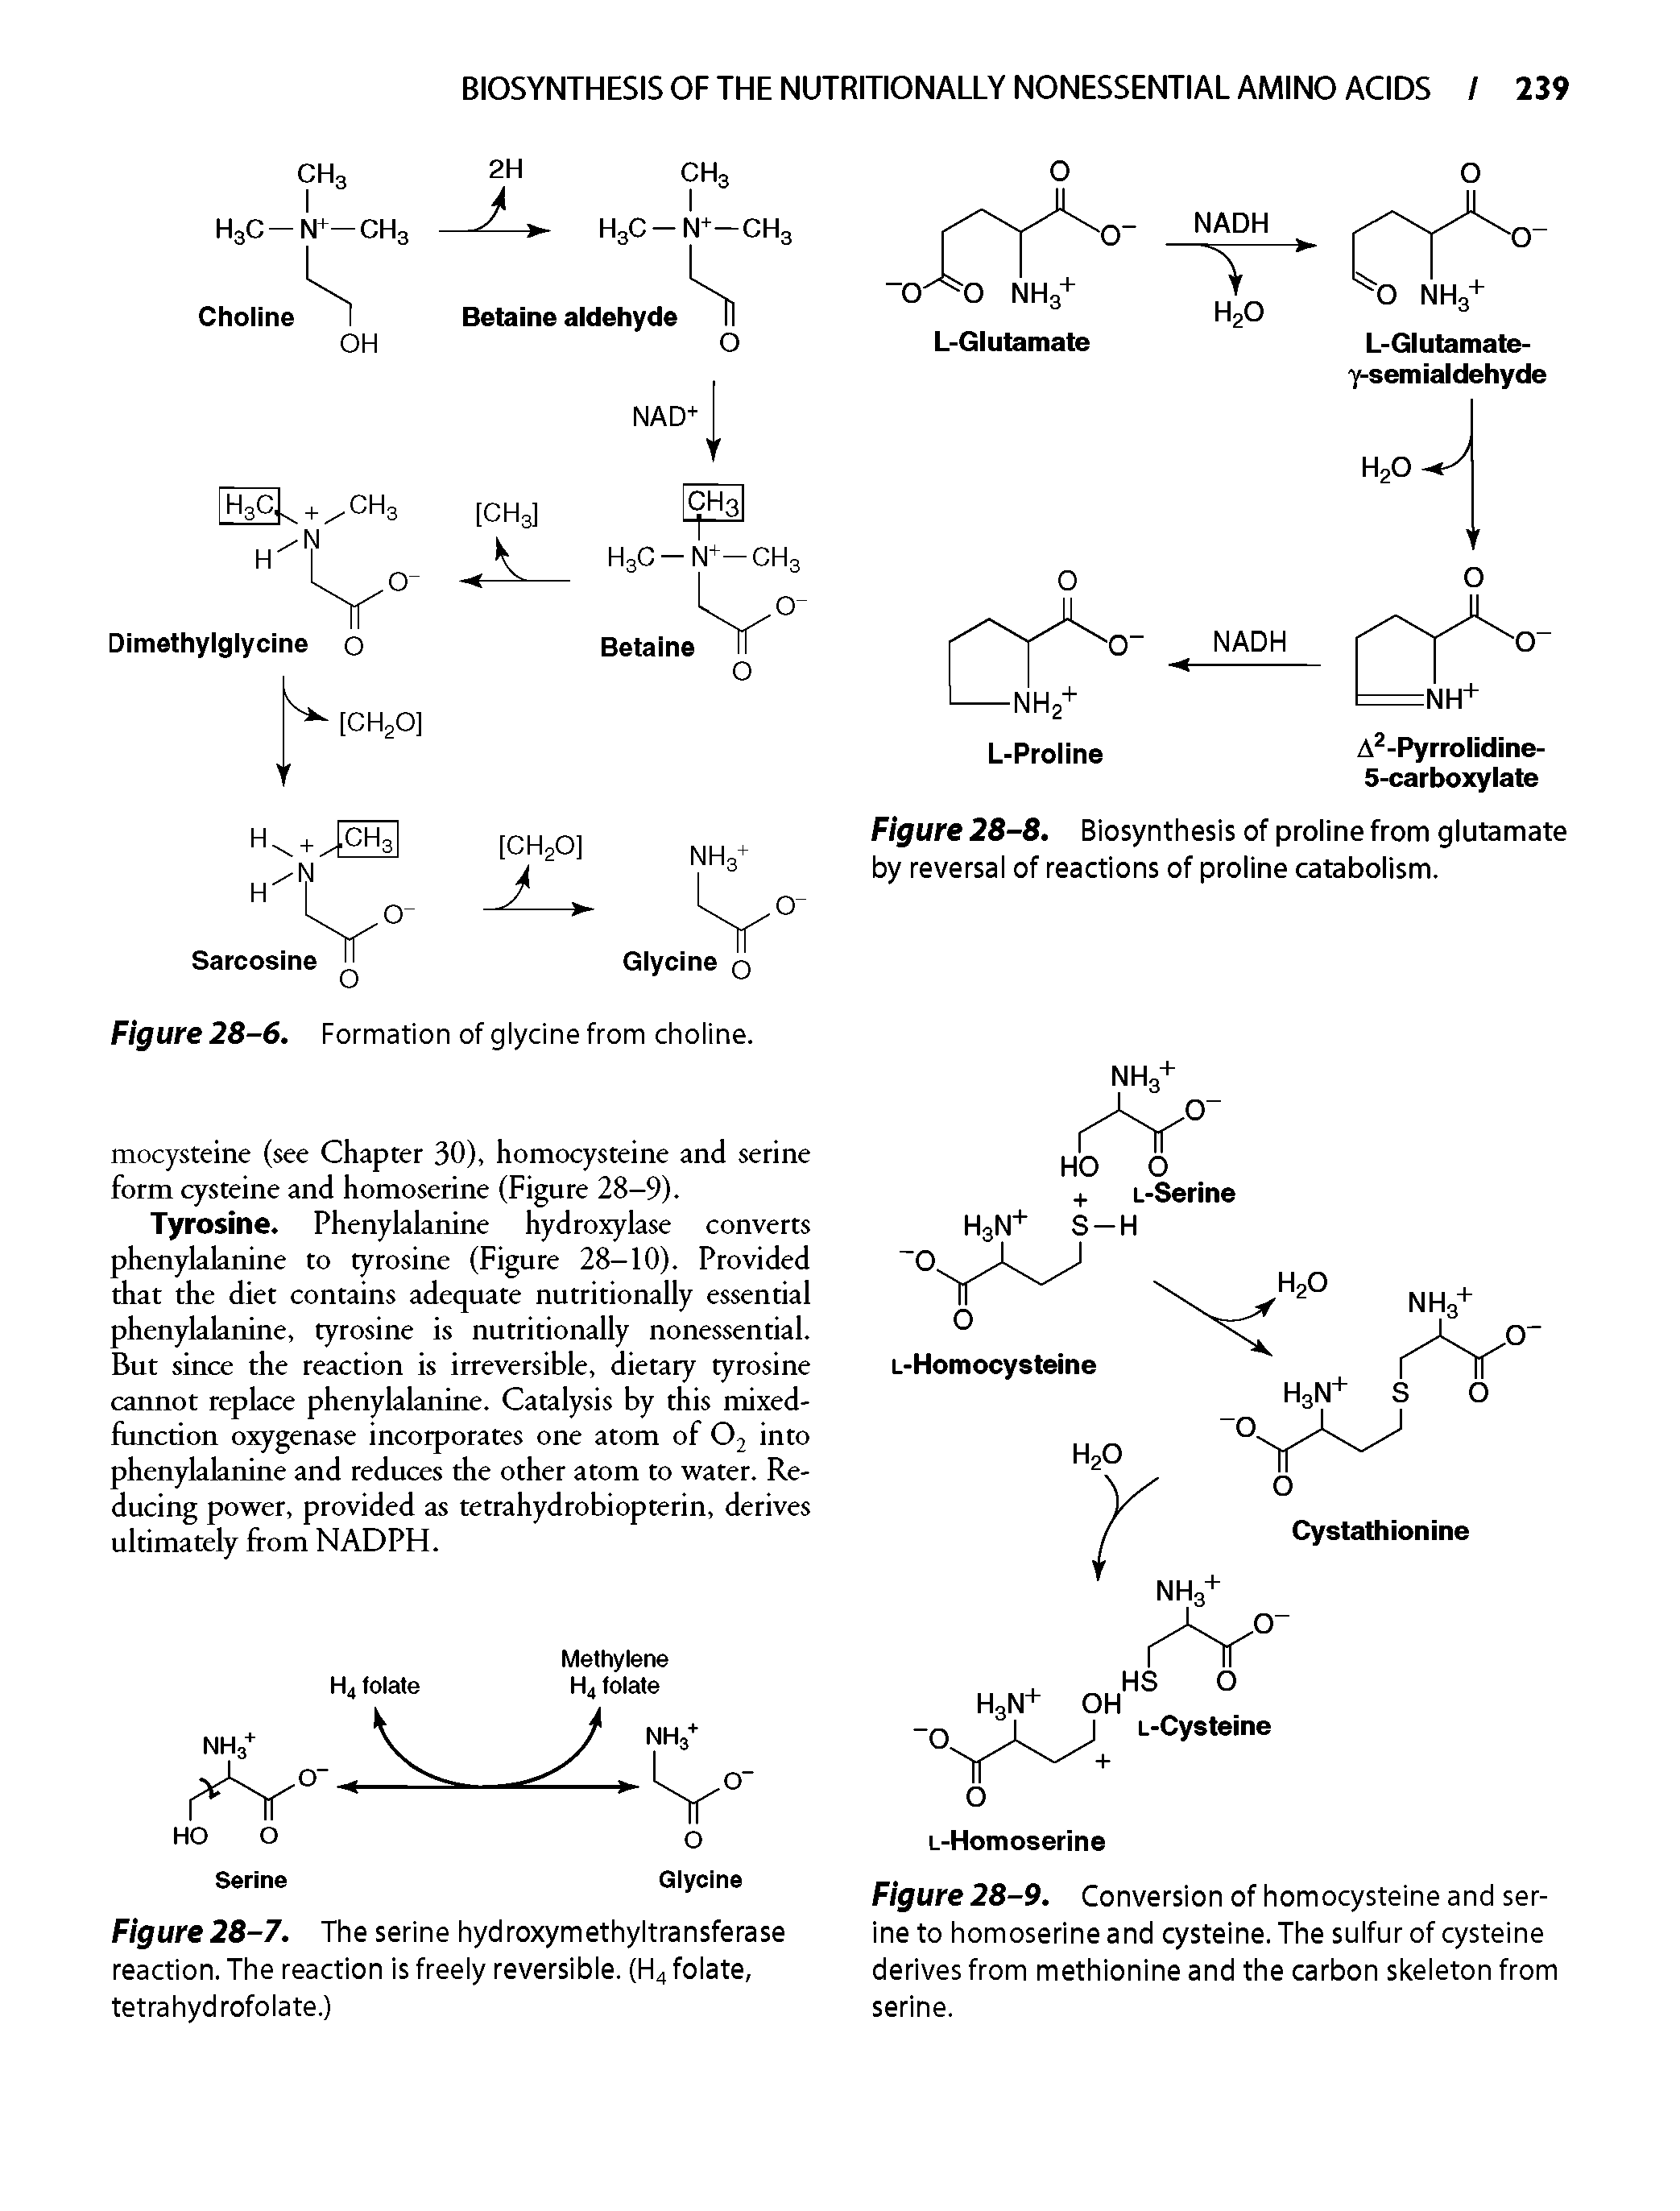 Figure 28-8. Biosynthesis of proline from glutamate by reversal of reactions of proline catabolism.